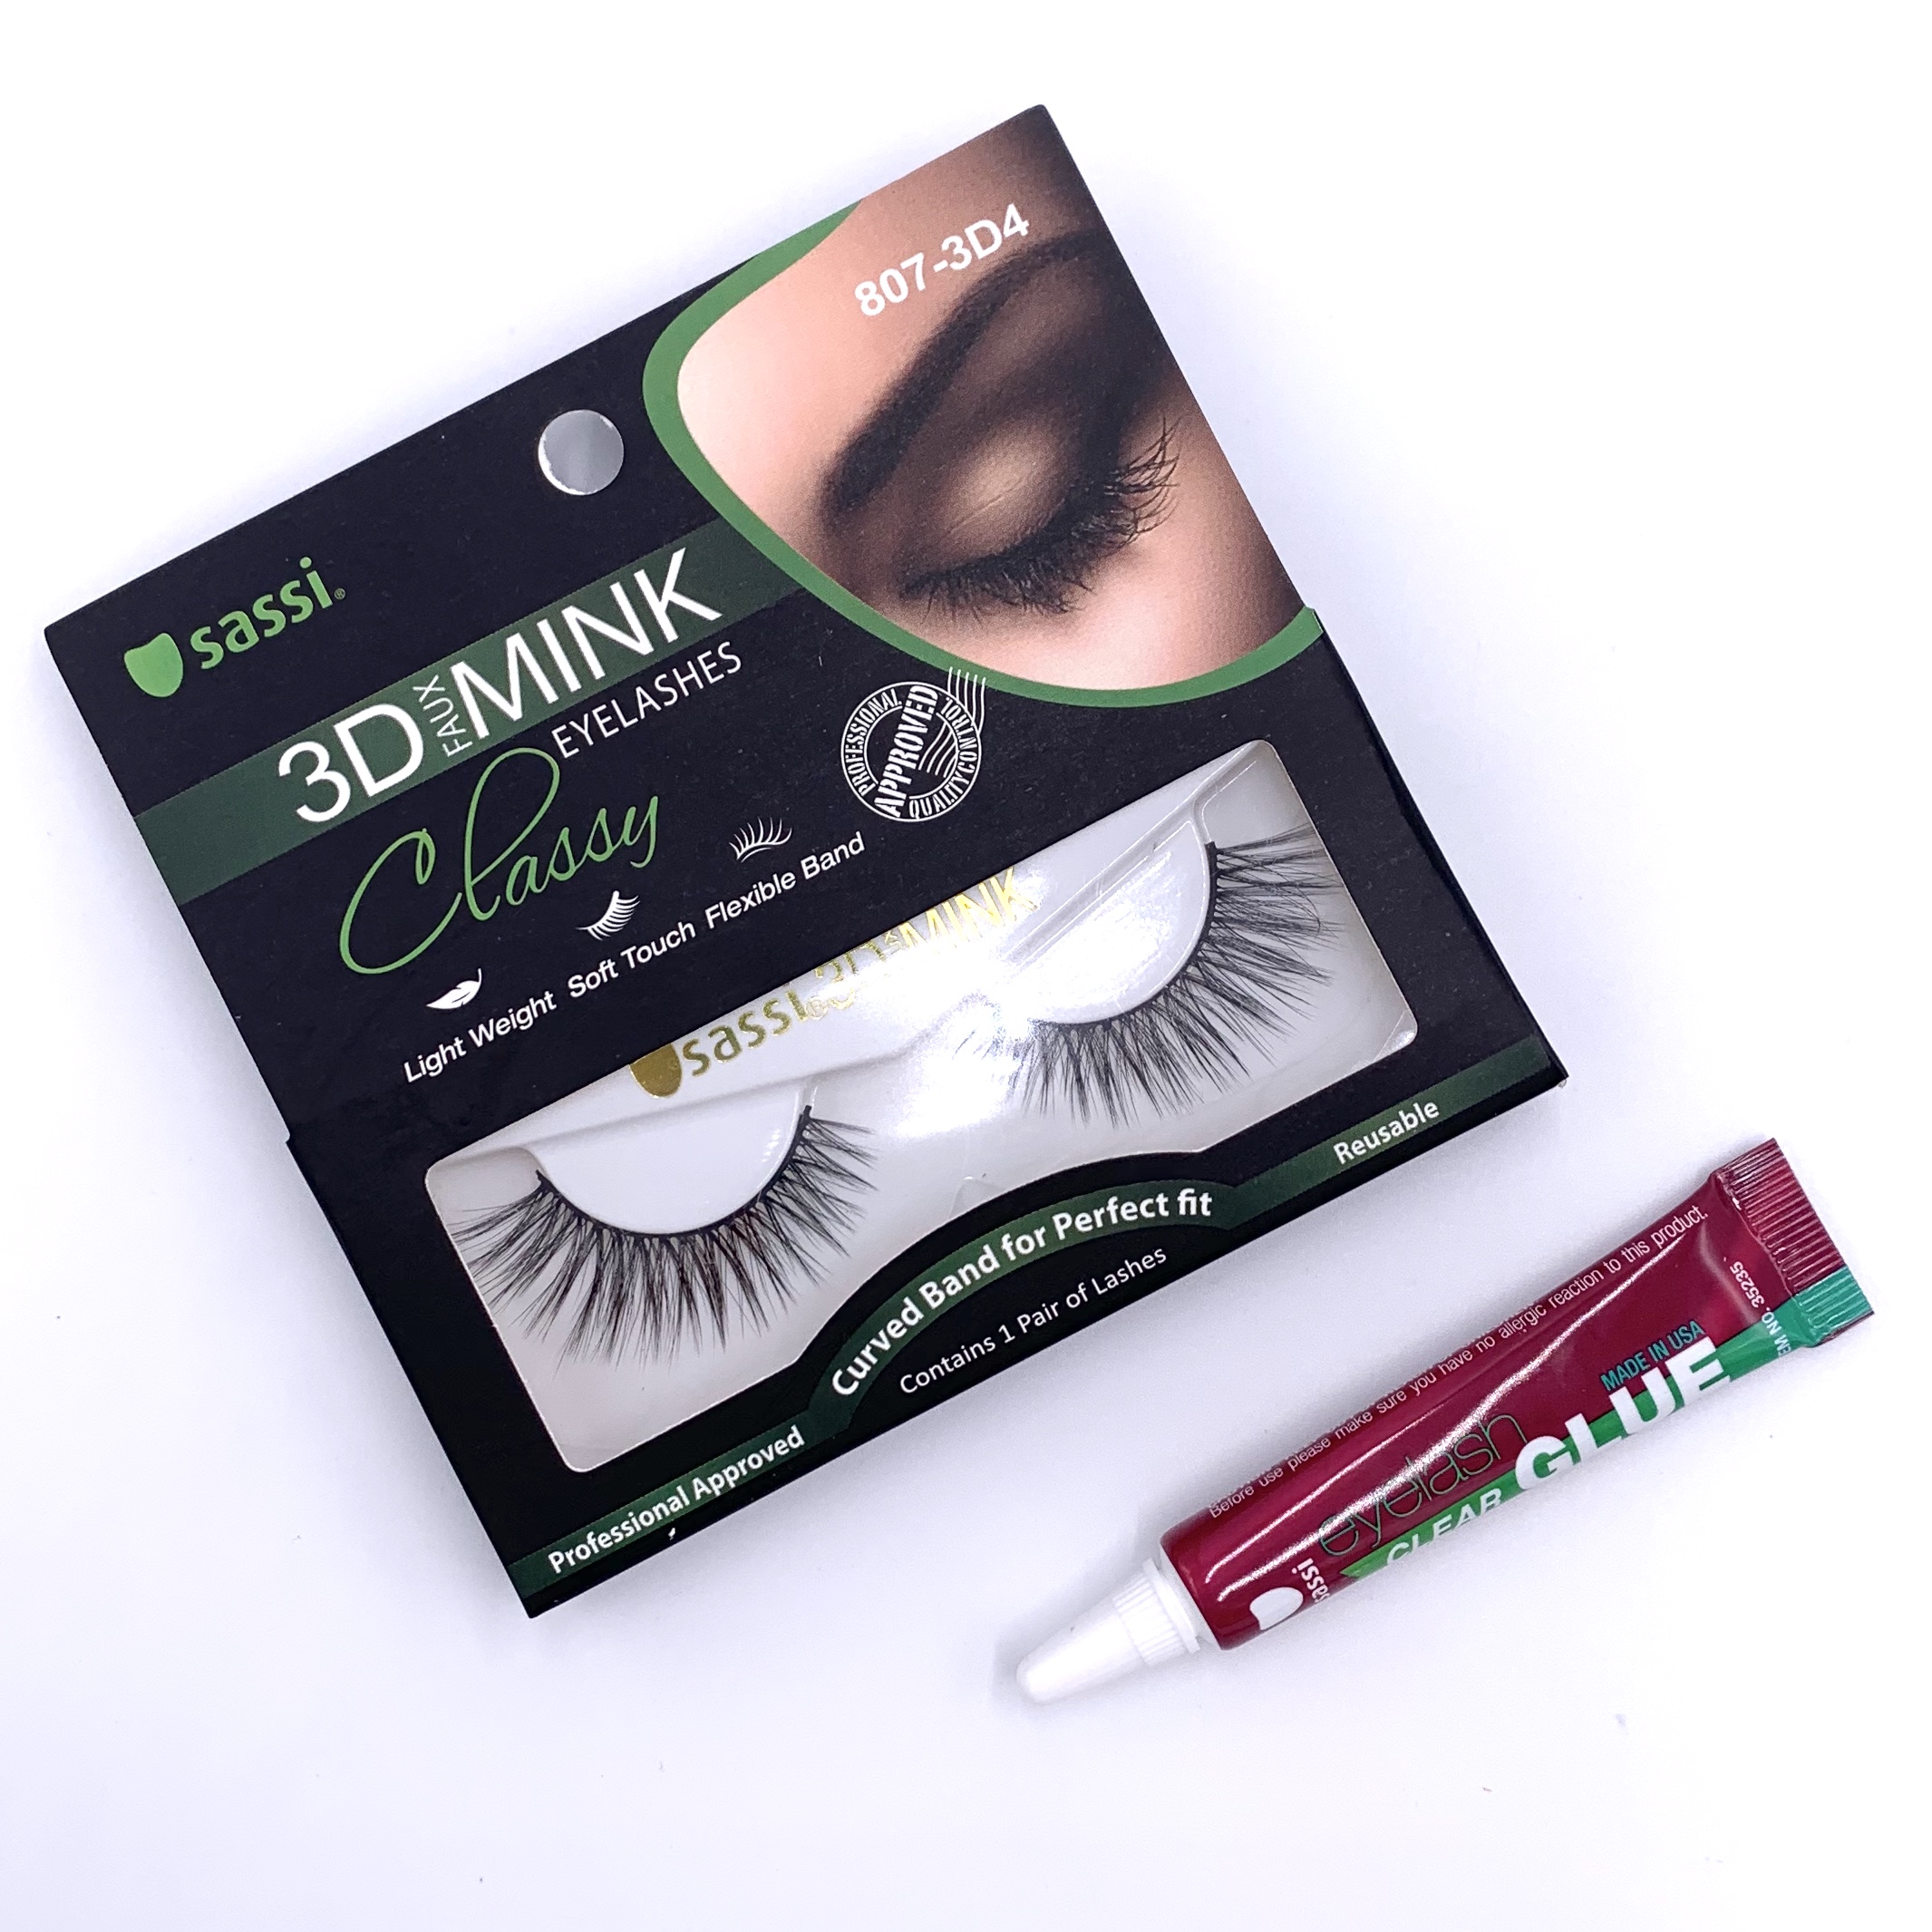 Sassi 3-D Faux Mink Lashes - Classy and Sassi Salon Eyelash Glue - Clear Front for Cocotique September 2020